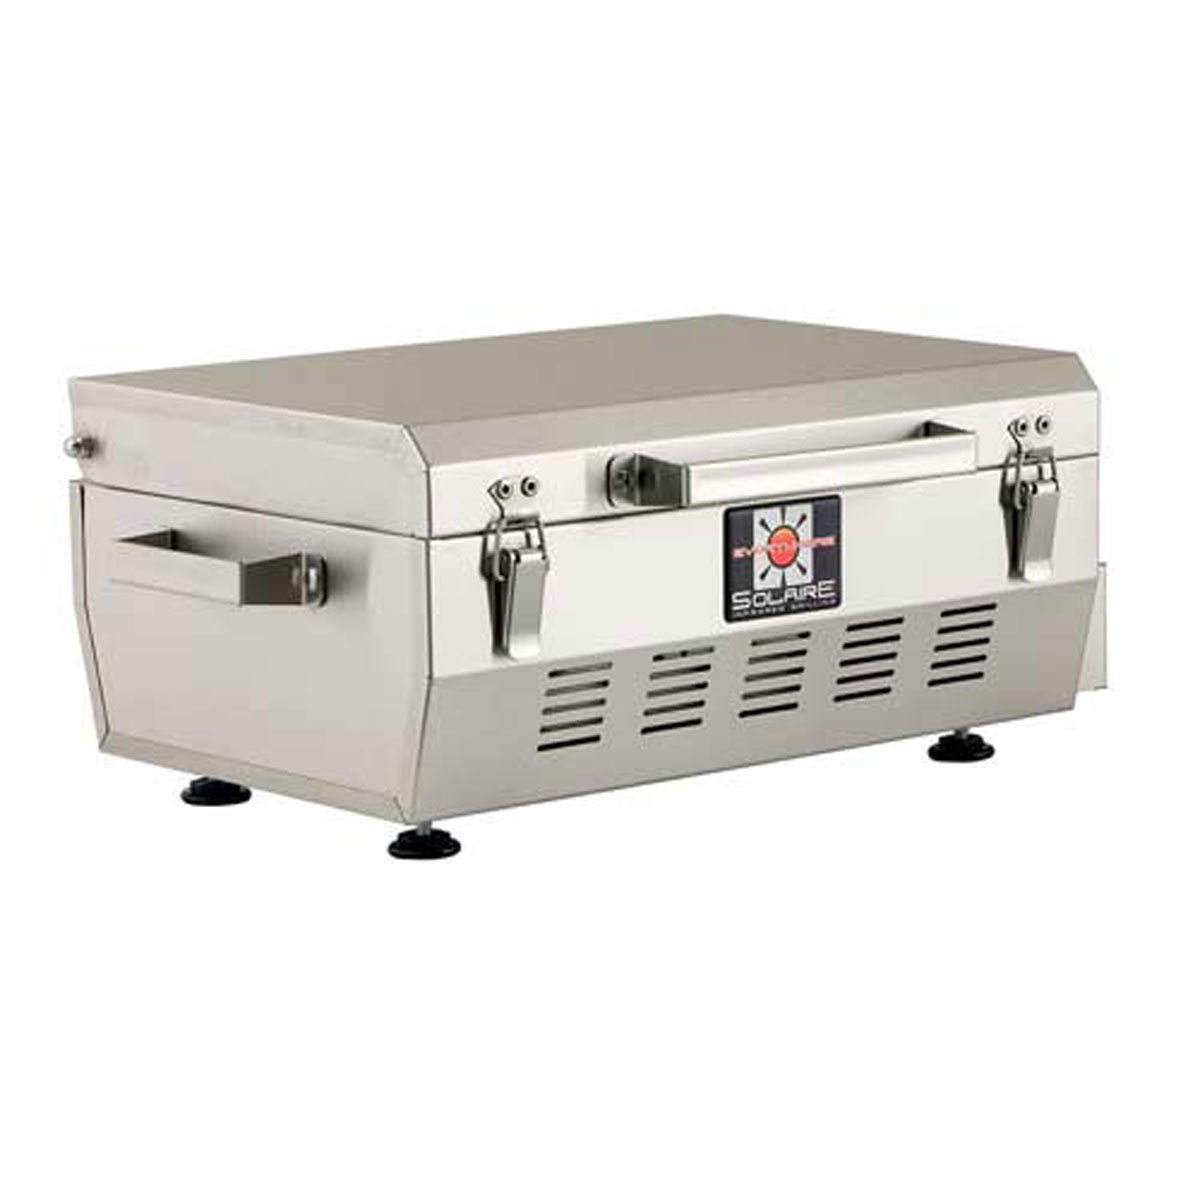 Solaire SOL-EV17A Everywhere Portable Infrared Propane Gas Grill, Stainless Steel - image 1 of 2